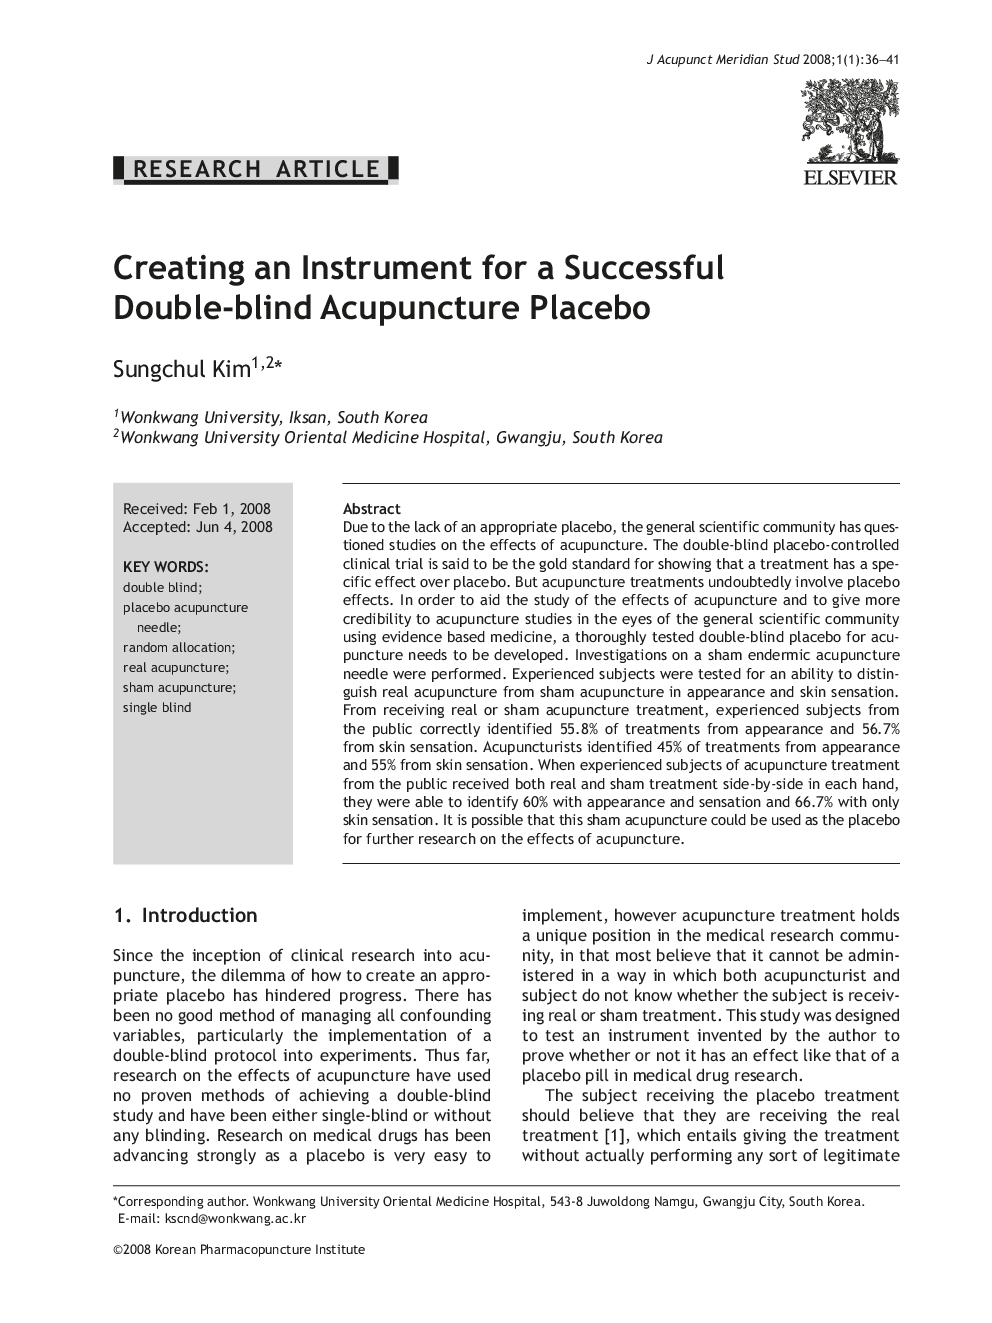 Creating an Instrument for a Successful Double-blind Acupuncture Placebo